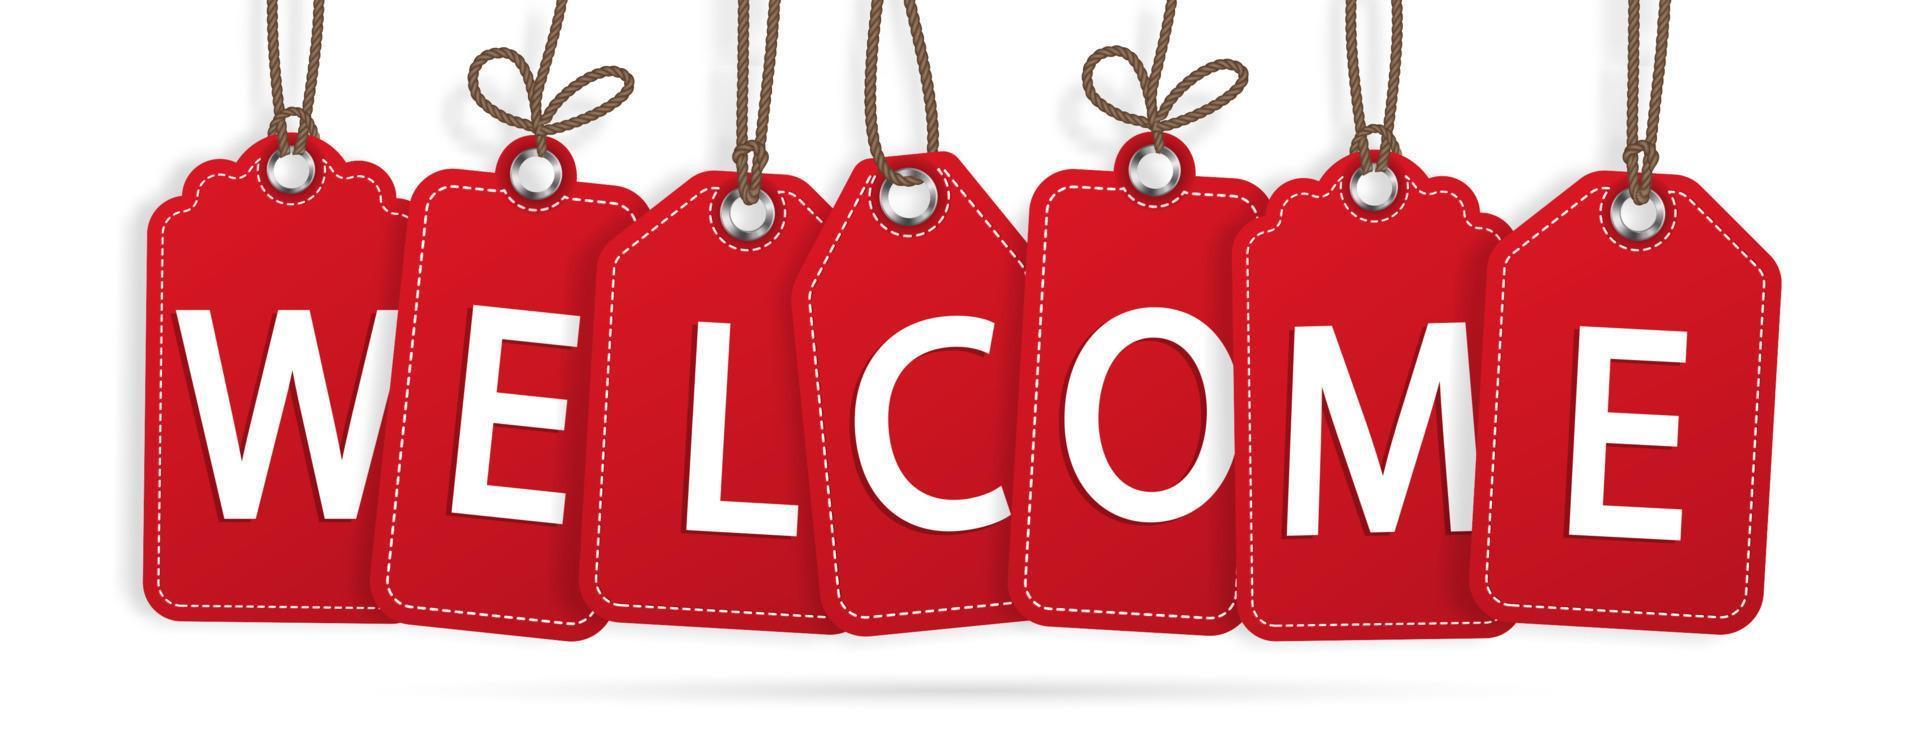 Welcome - Hanging Stickers Header, hanging on ropes. vector